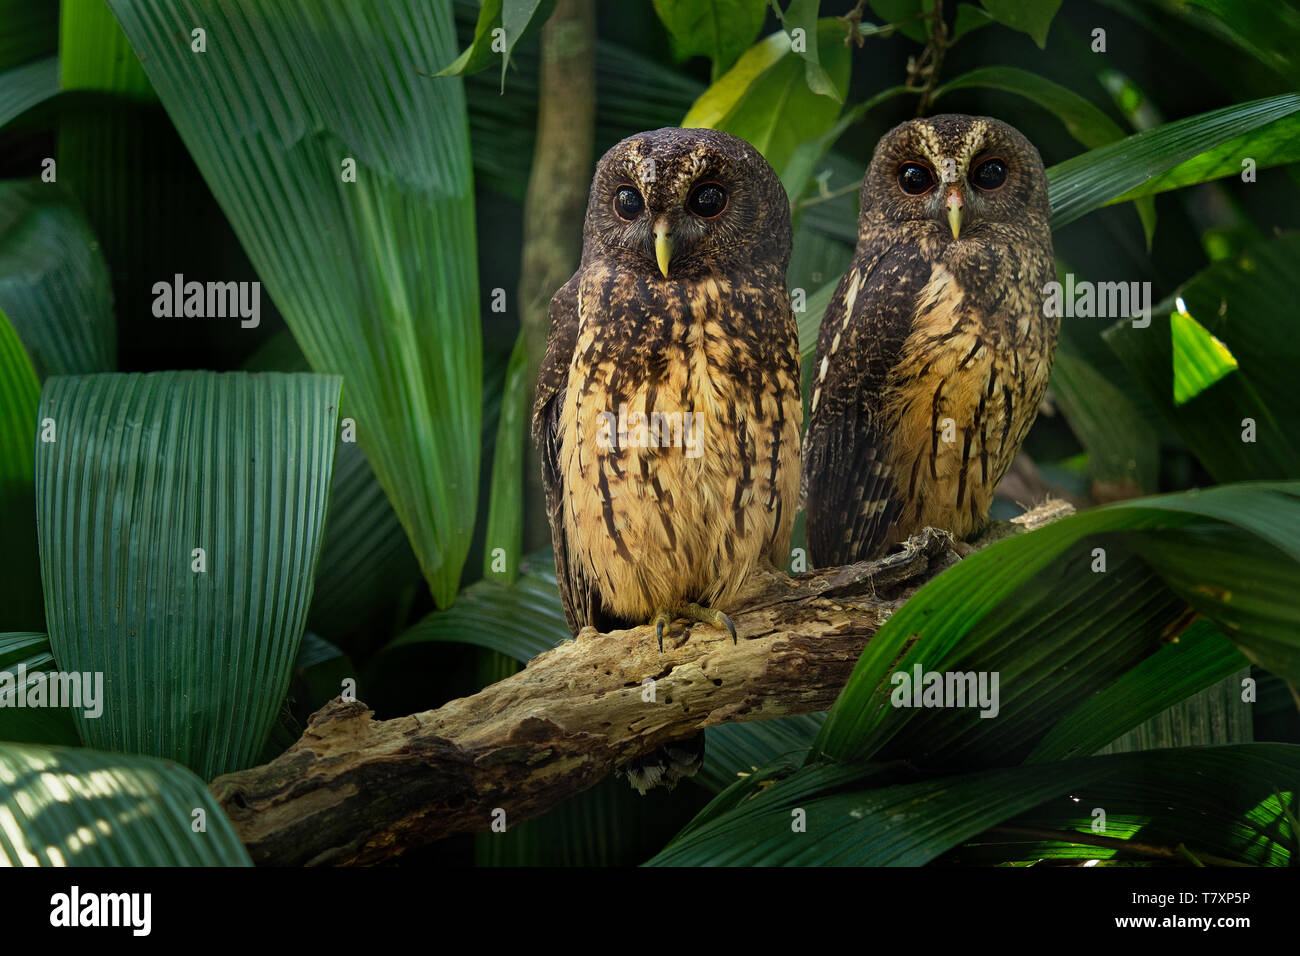 Mottled Owl - Ciccaba (Strix) virgata is owl found in Central and South America from Mexico to Brazil and Argentina. Stock Photo